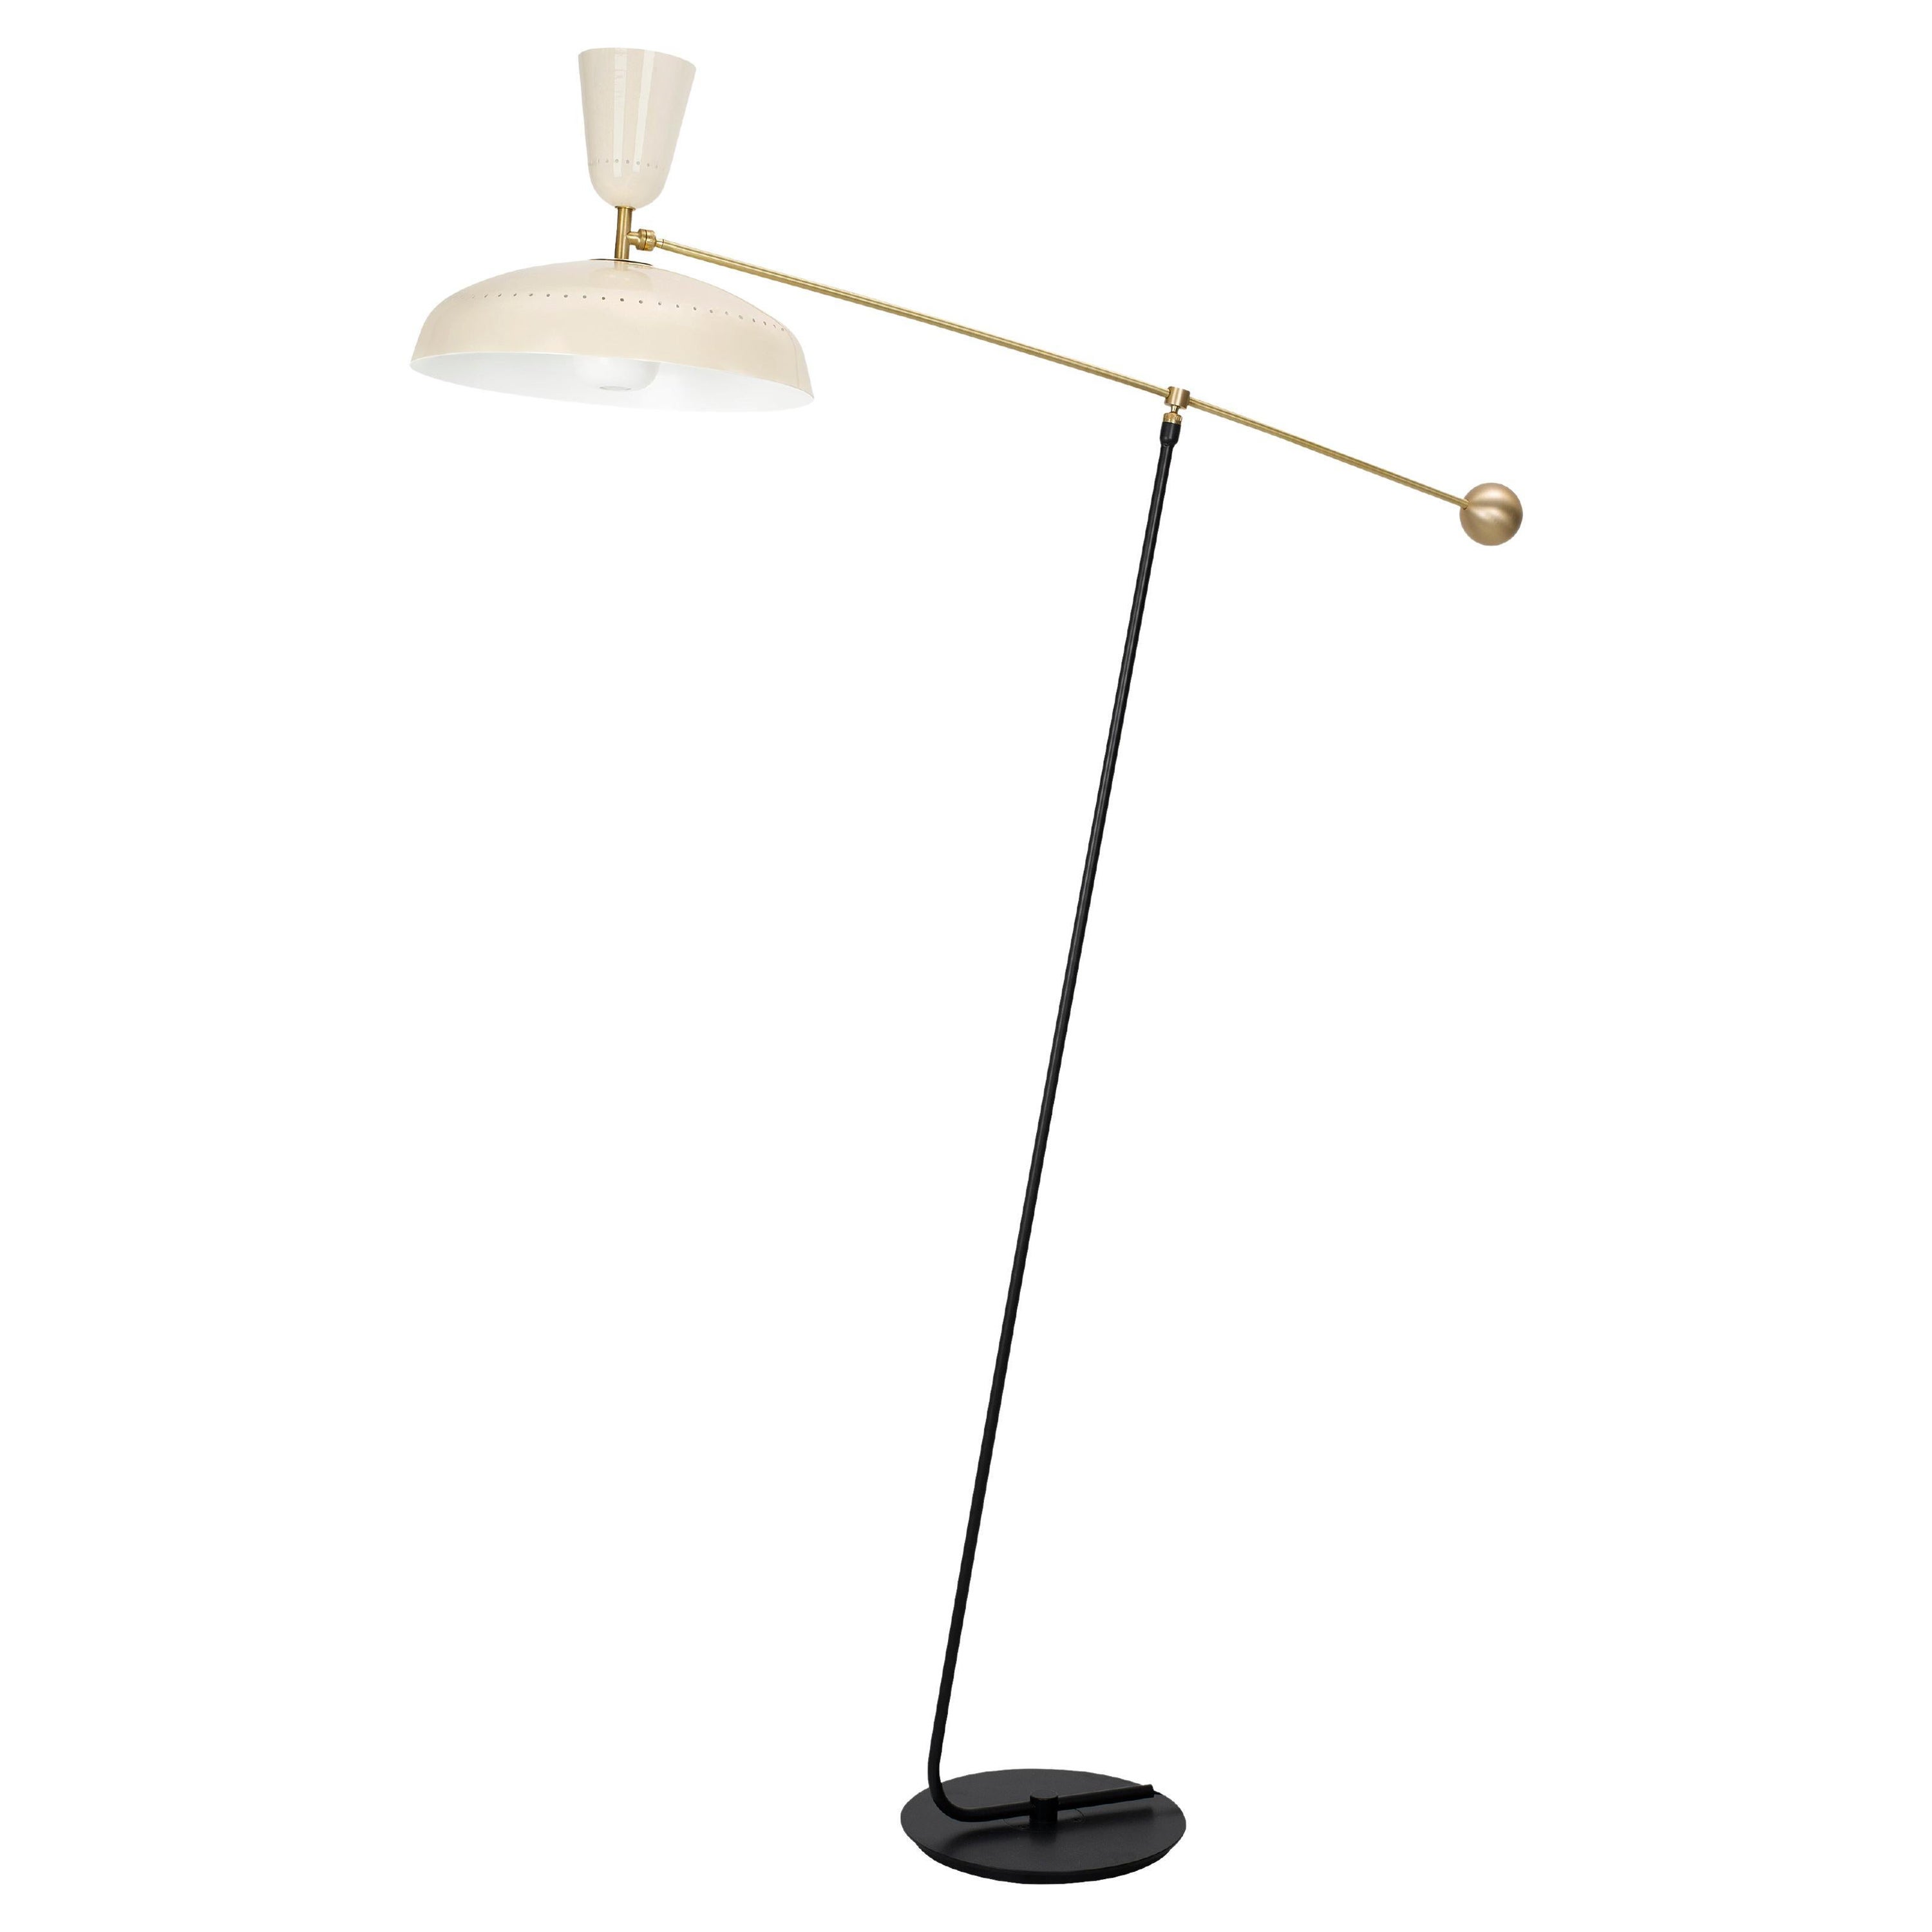 Large Pierre Guariche 'G1' Floor Lamp for Sammode Studio in Chalk For Sale